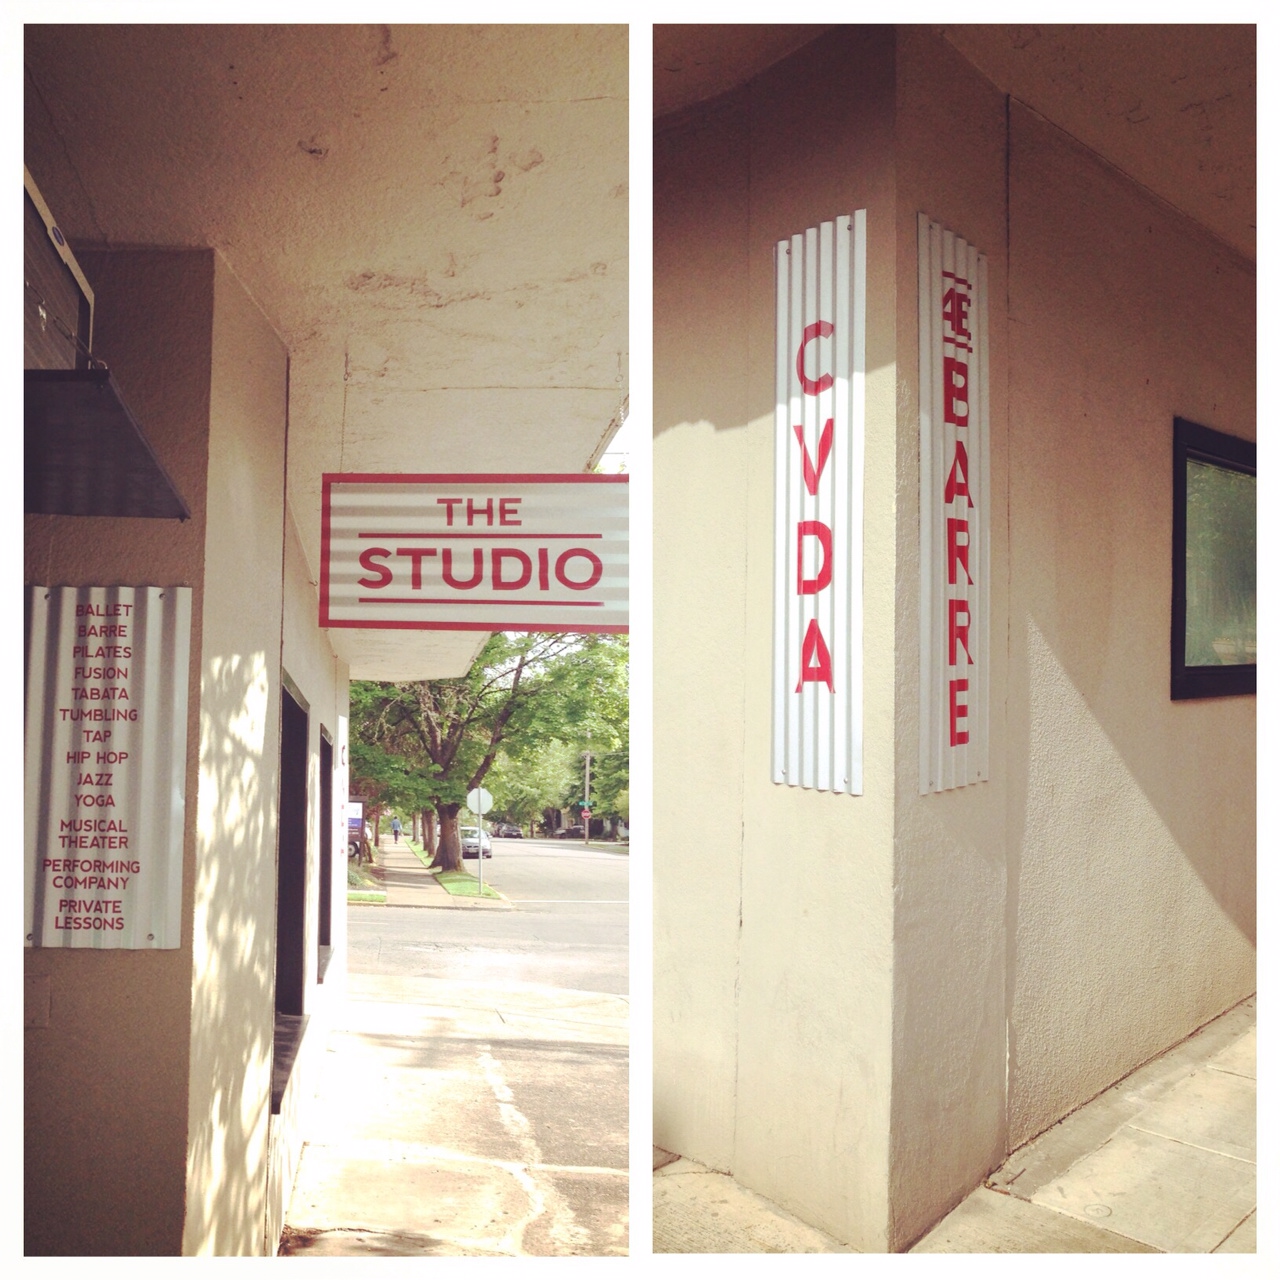 The Studio debuts June 16th in McMinnville